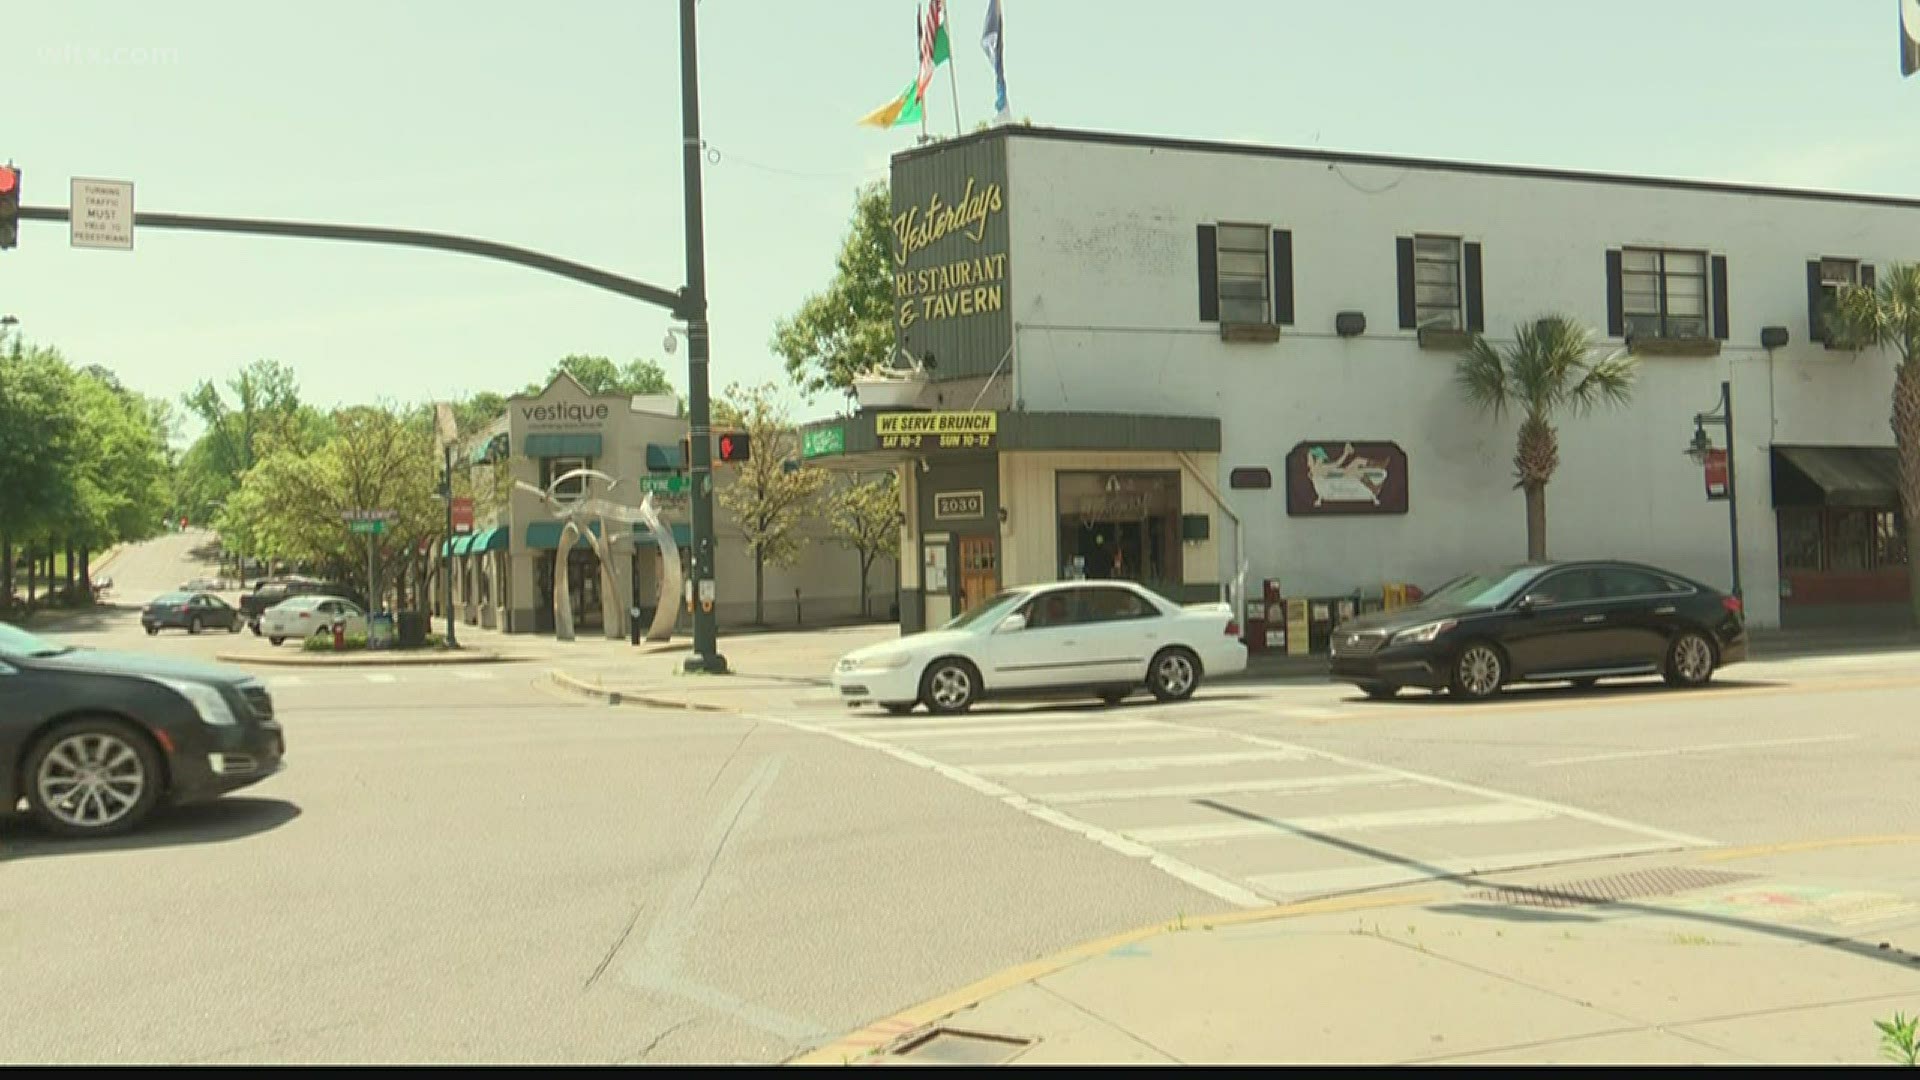 'Yesterday's' the Five Points restaurant with the cowboy in the bathtub is calling it quits after 43 years.